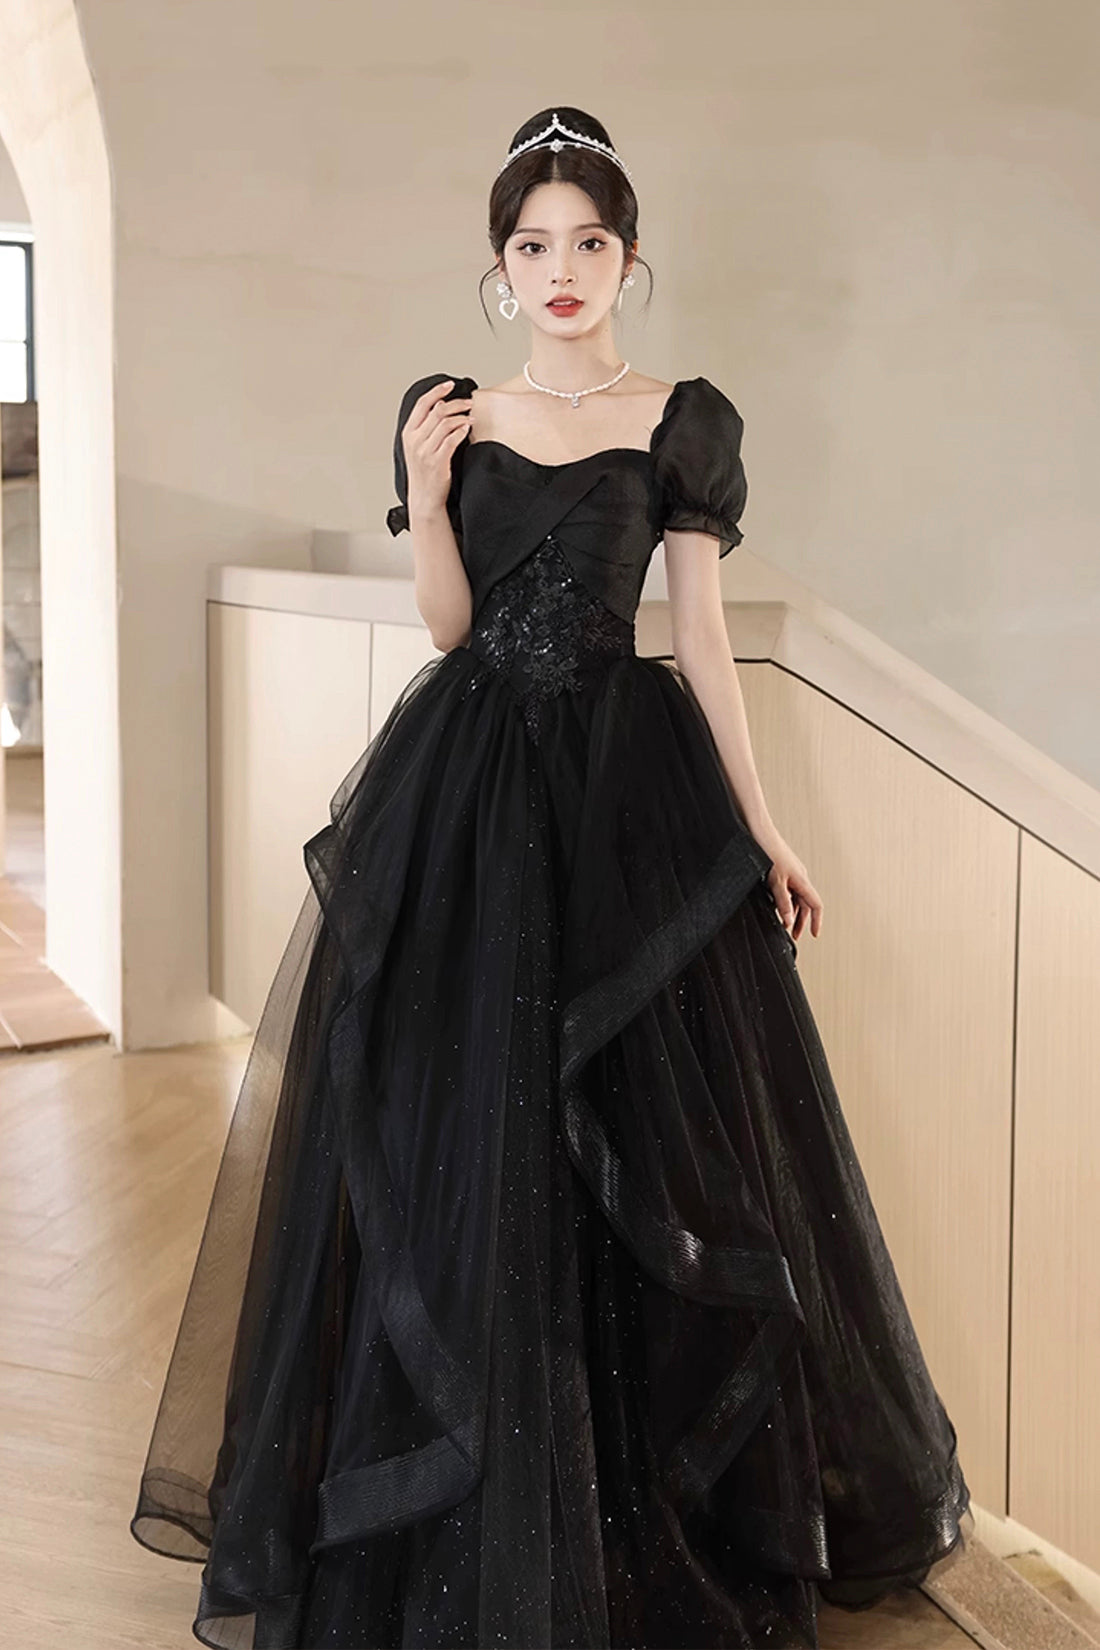 Beaded Lace Long Black Prom Dress With Puffy Sleeves - $136.98 #MYS68048 -  SheProm.com